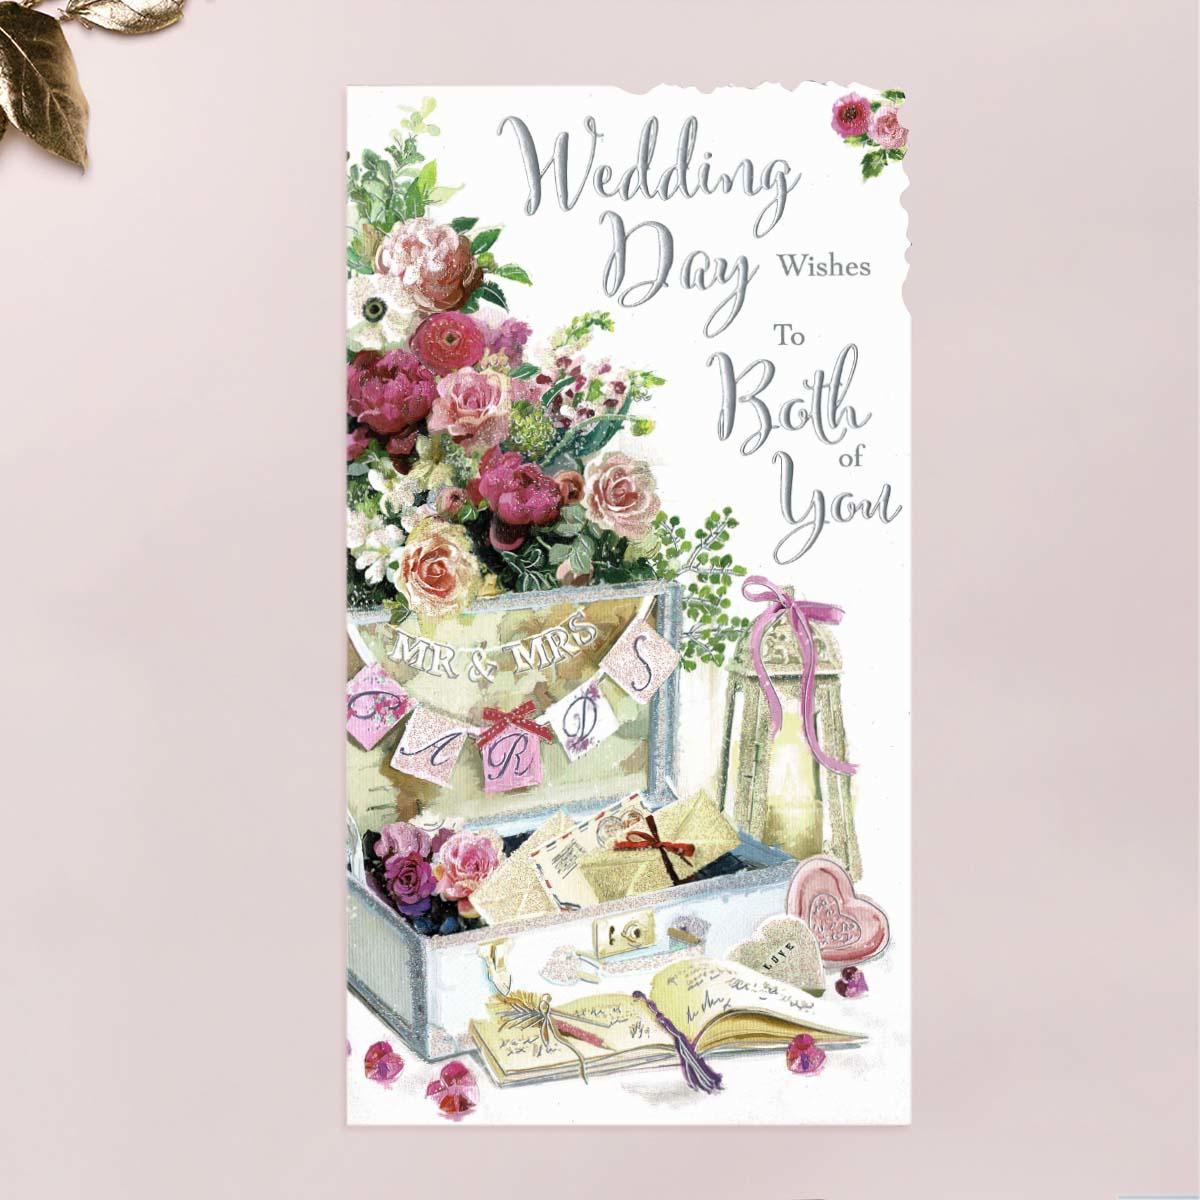 Wedding Day Mr and Mrs Card Front Image